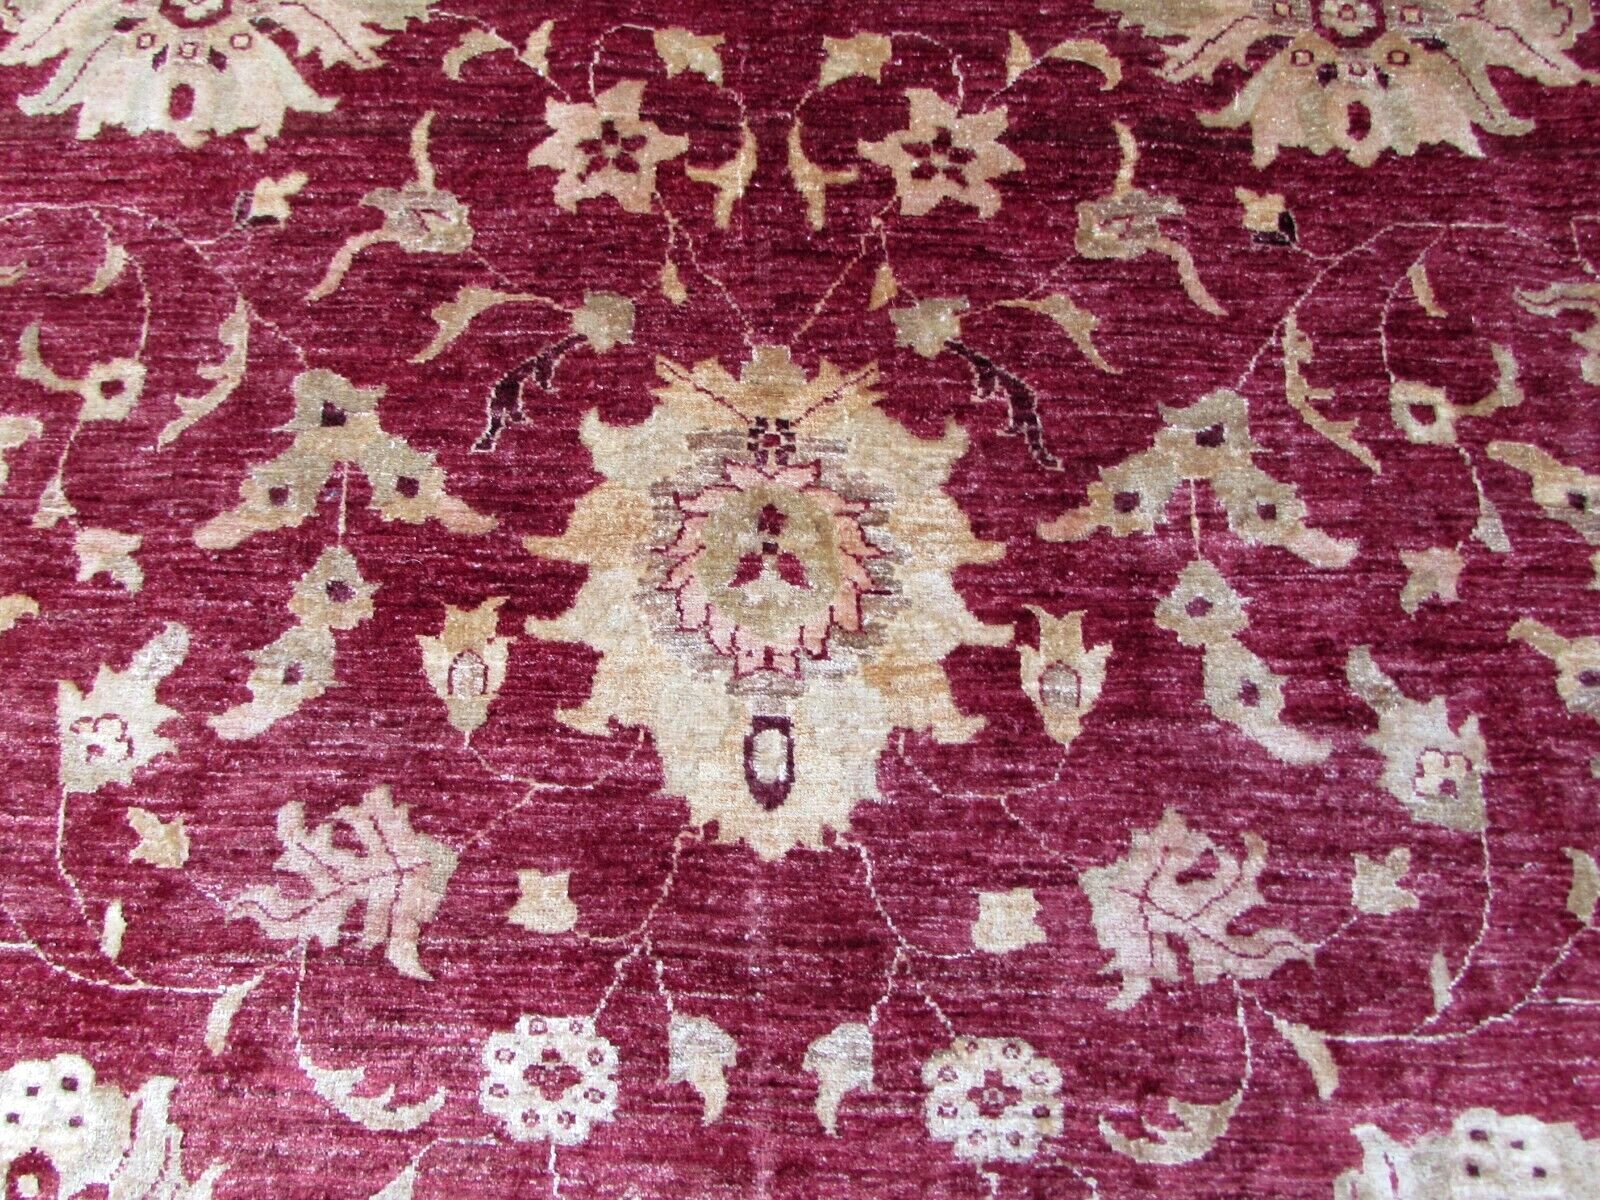 Hand-spun and hand-dyed wool fibers used to create the rug